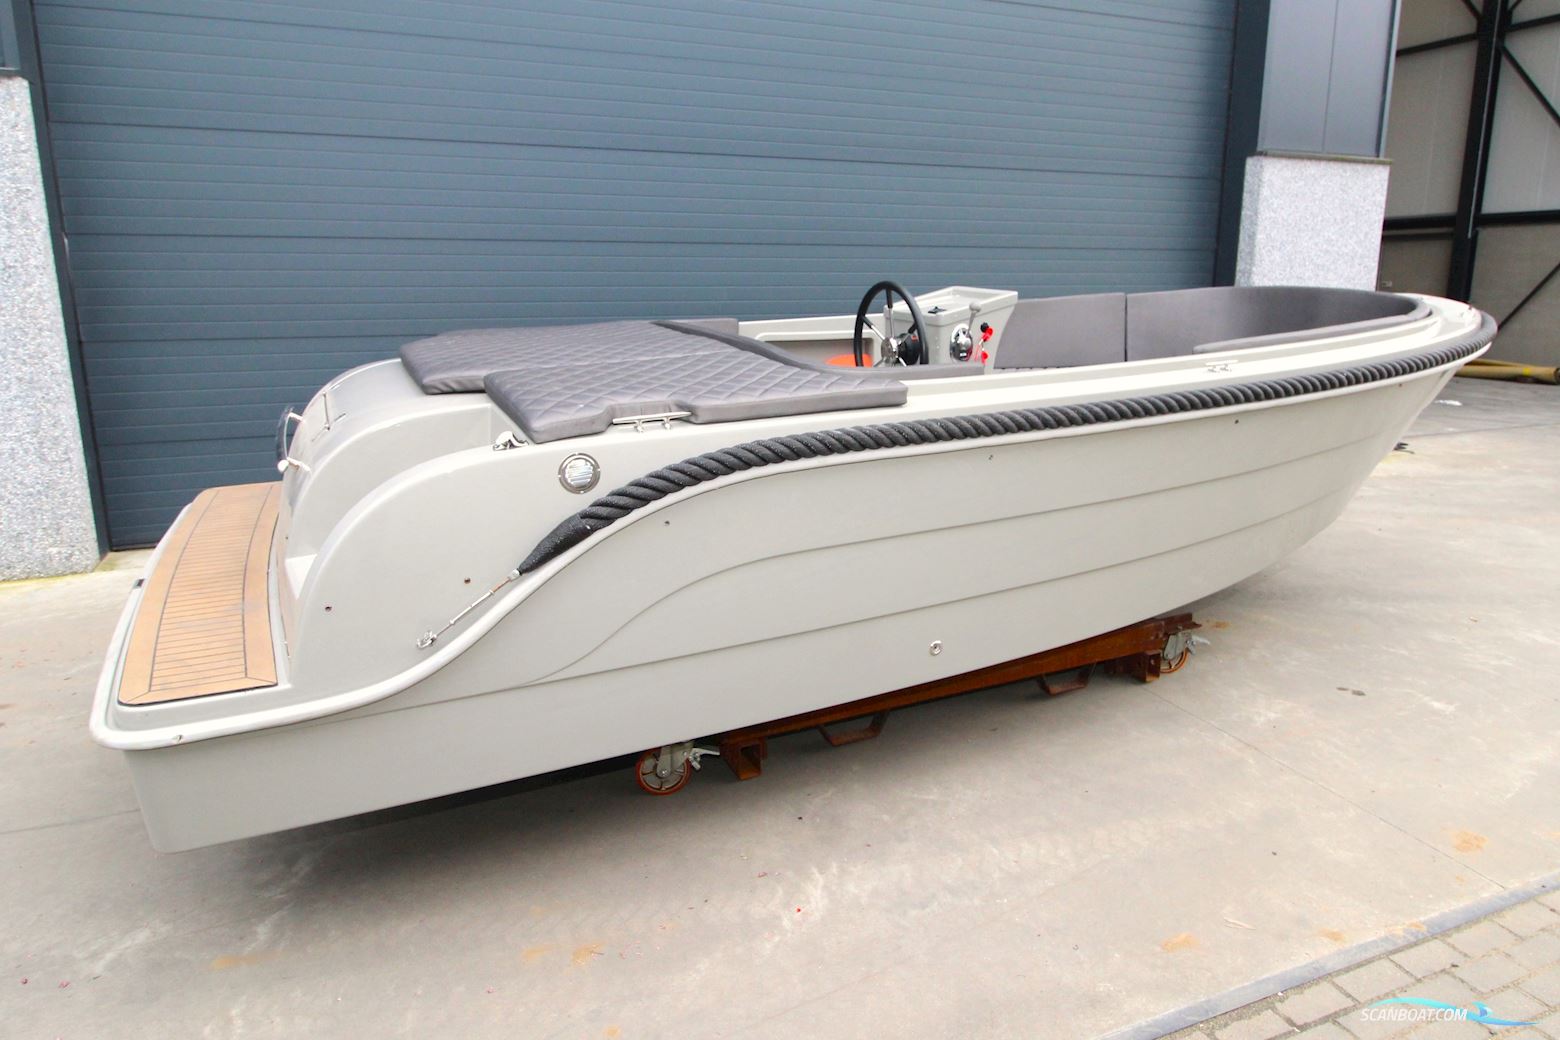 Tendr 600 Outboard Motor boat 2021, The Netherlands